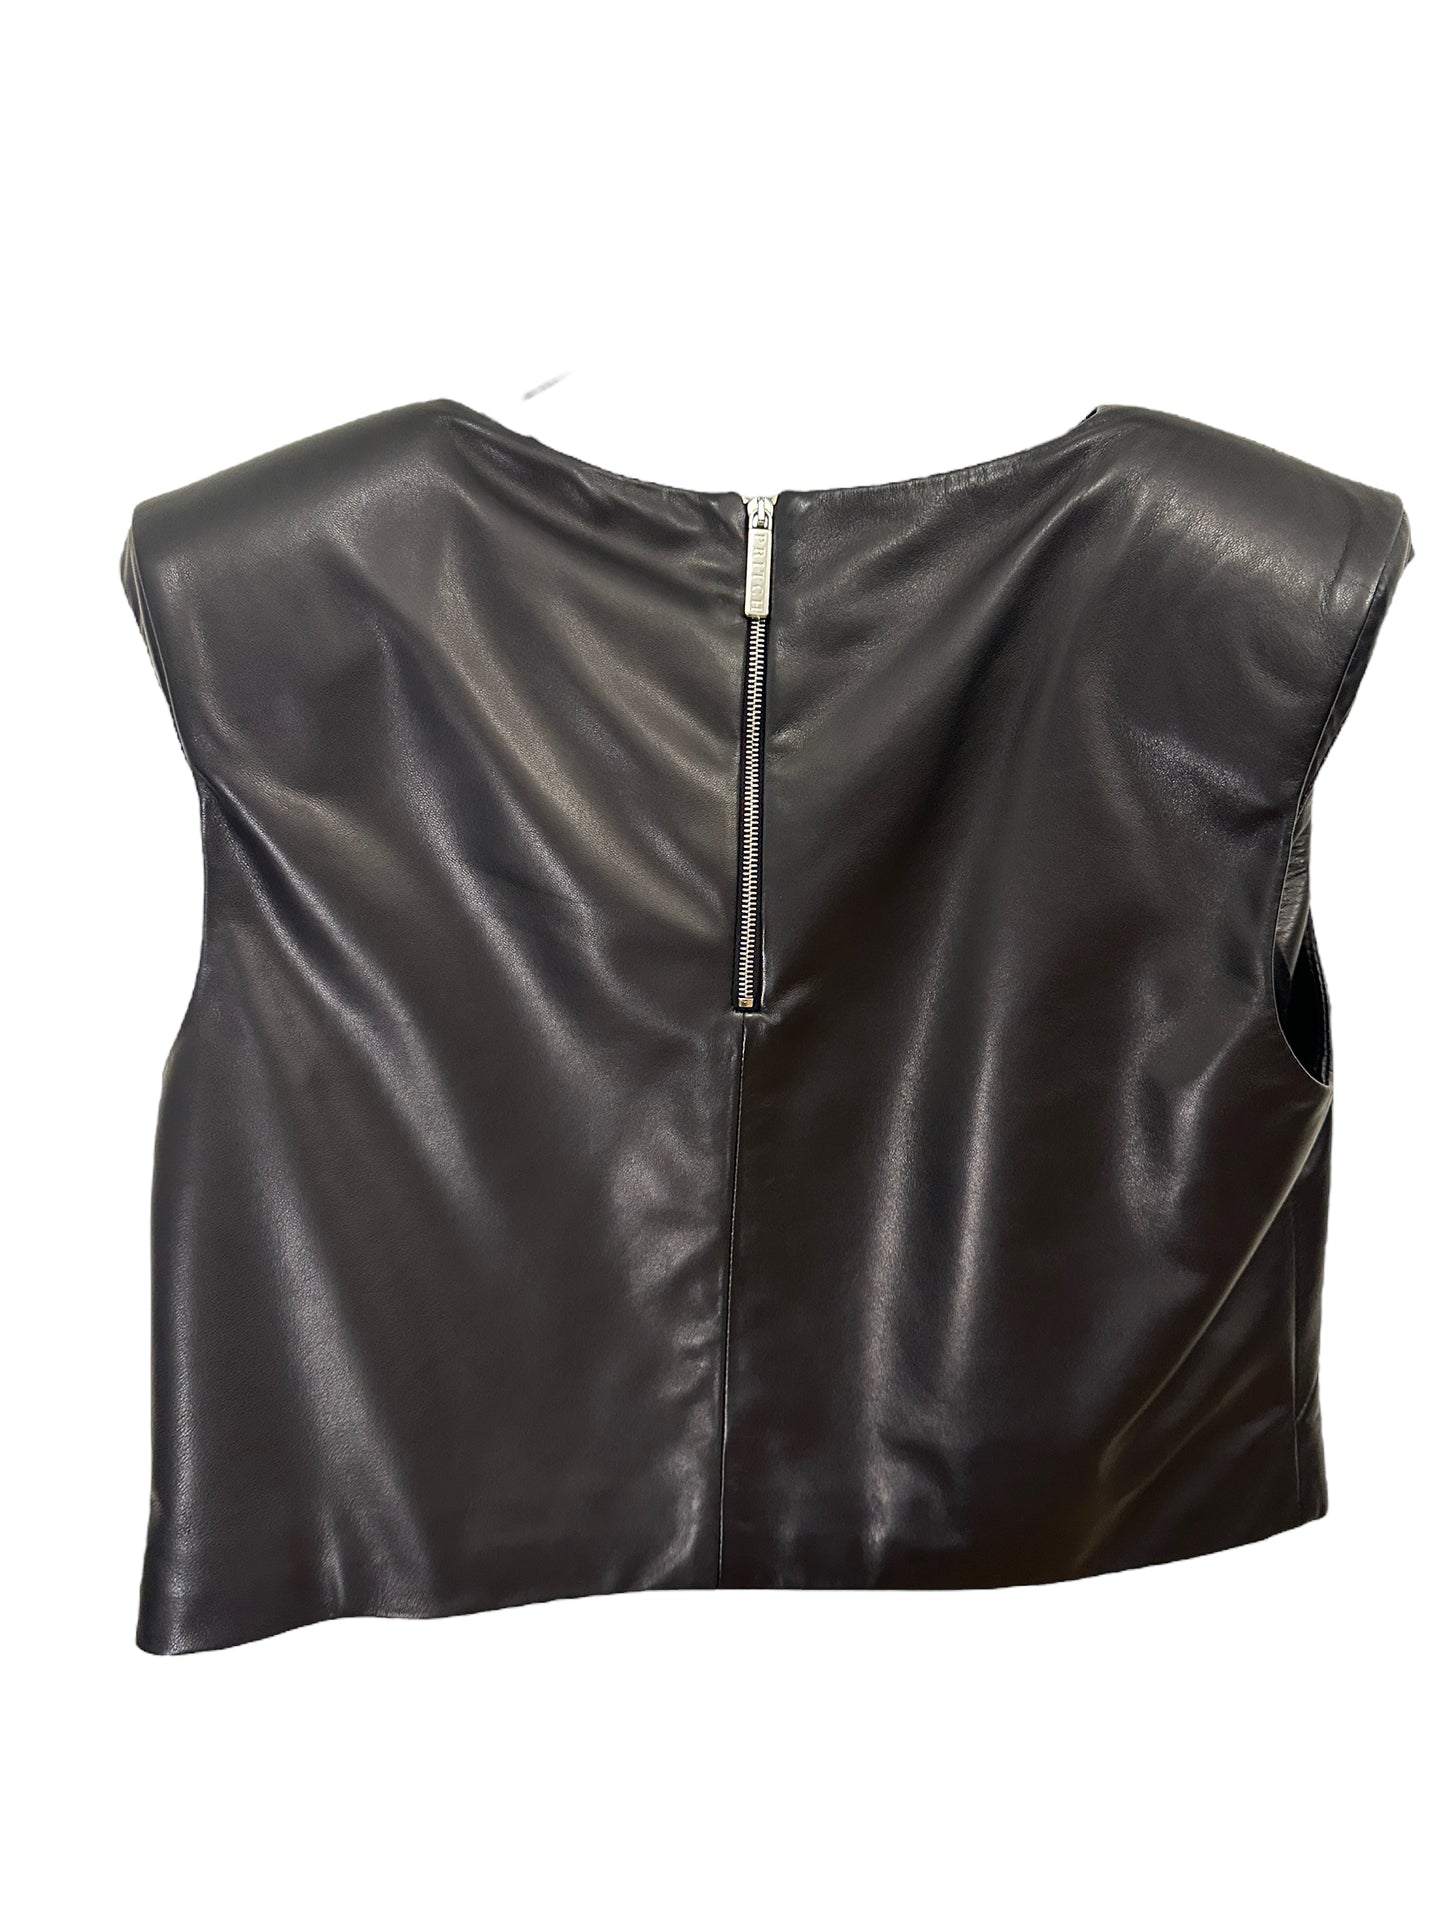 PRITCH LONDON Leather Crop Top - Size 8